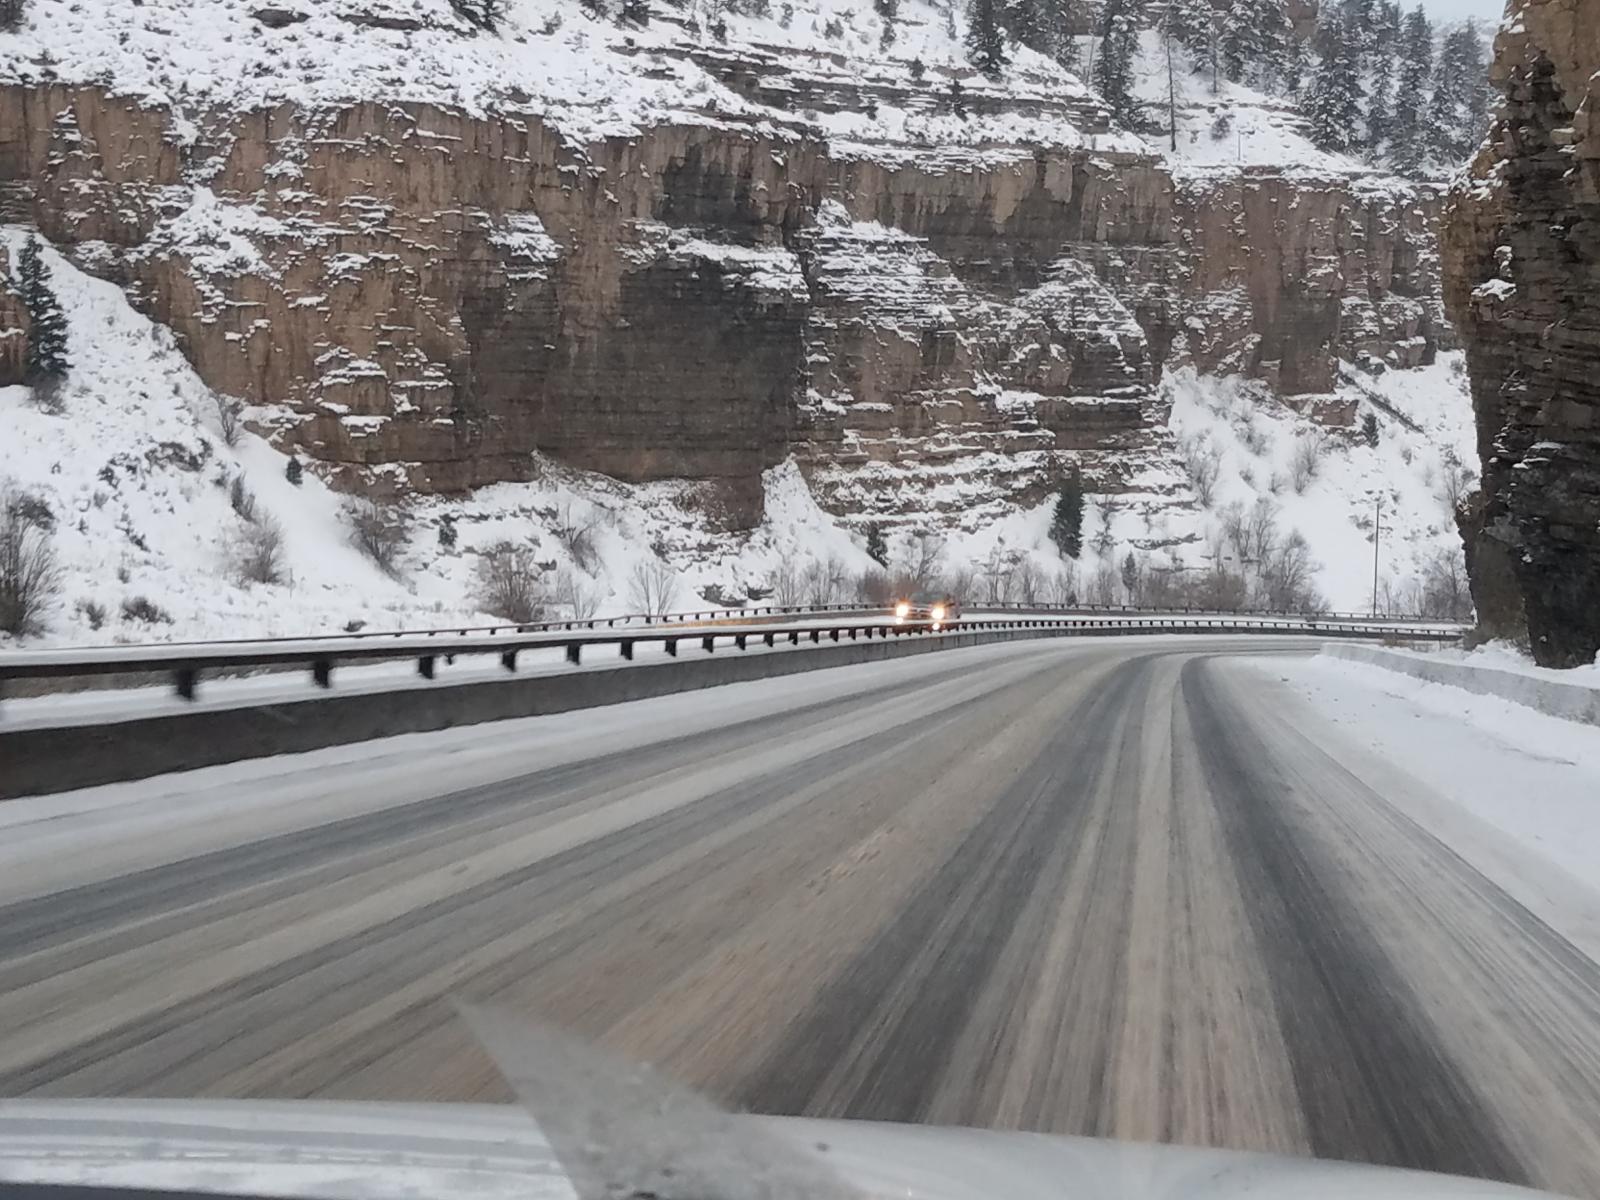 Icy roads in Glenwood Canyon